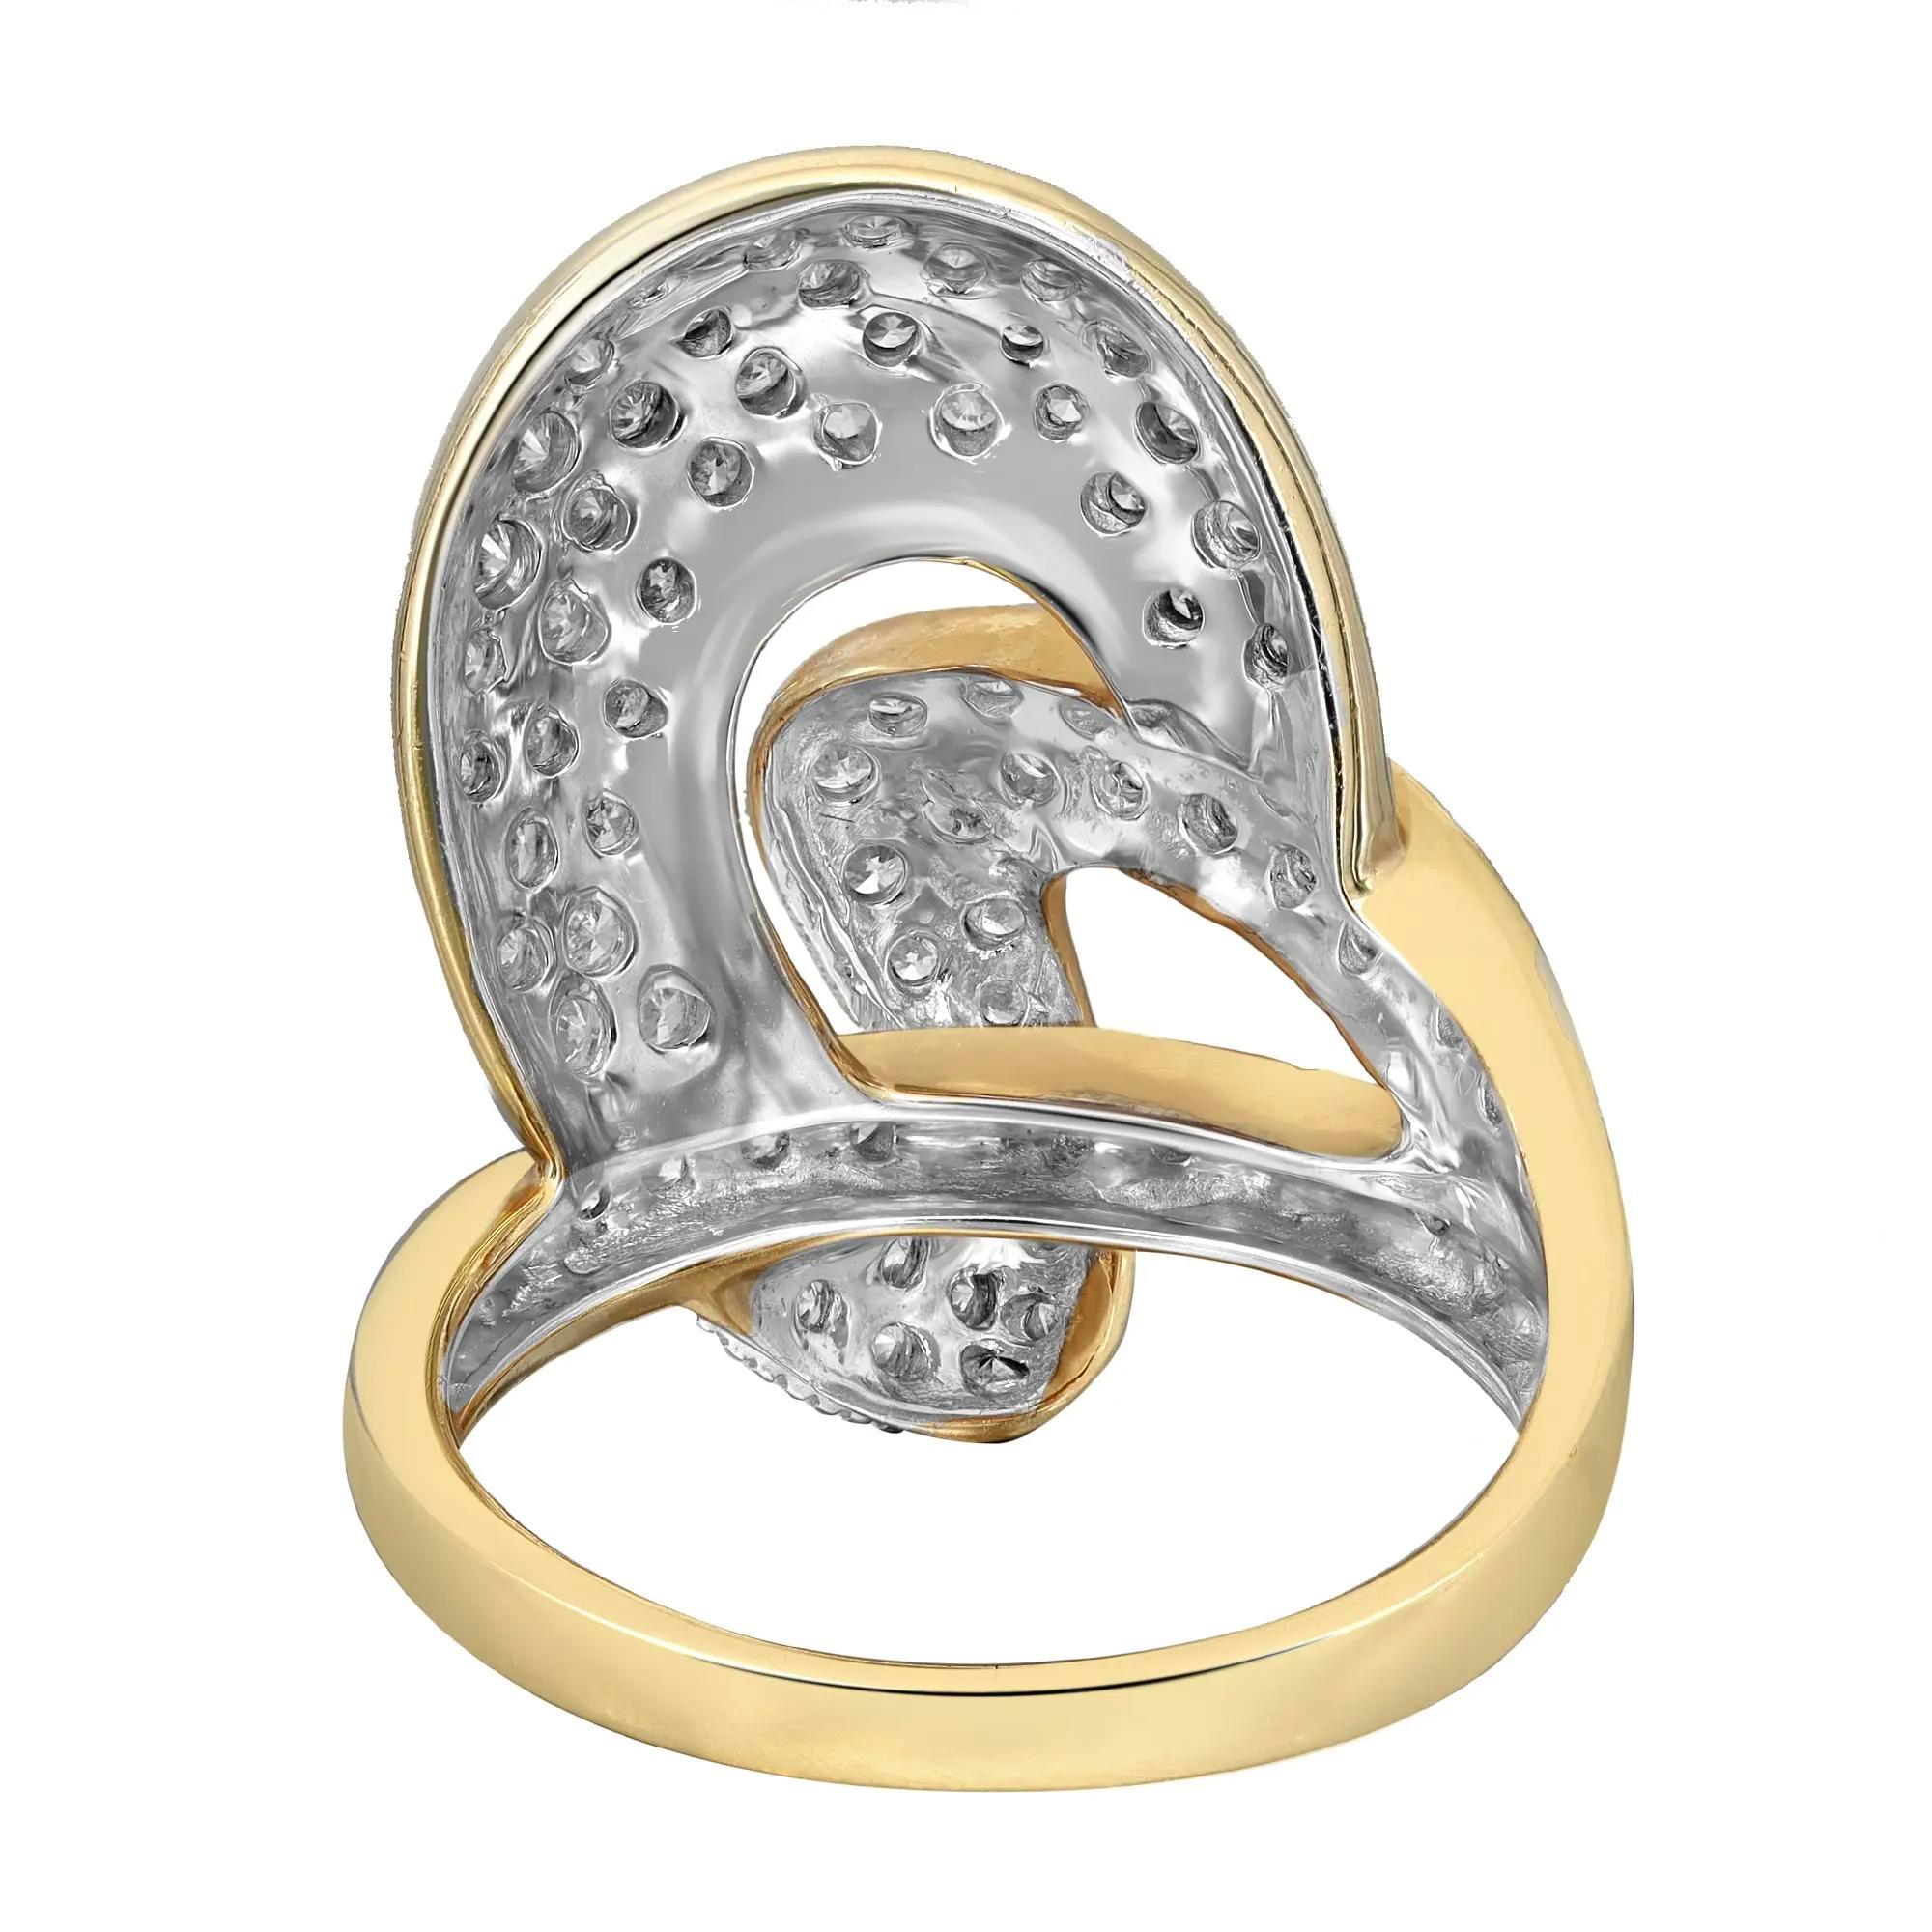 This beautiful diamond cocktail ring is crafted in 14k yellow gold. It features sparkling diamonds in pave setting weighing 1.70 carats. This ring will be a great addition to your jewelry collection. The size of the ring is 7.5. The total weight is